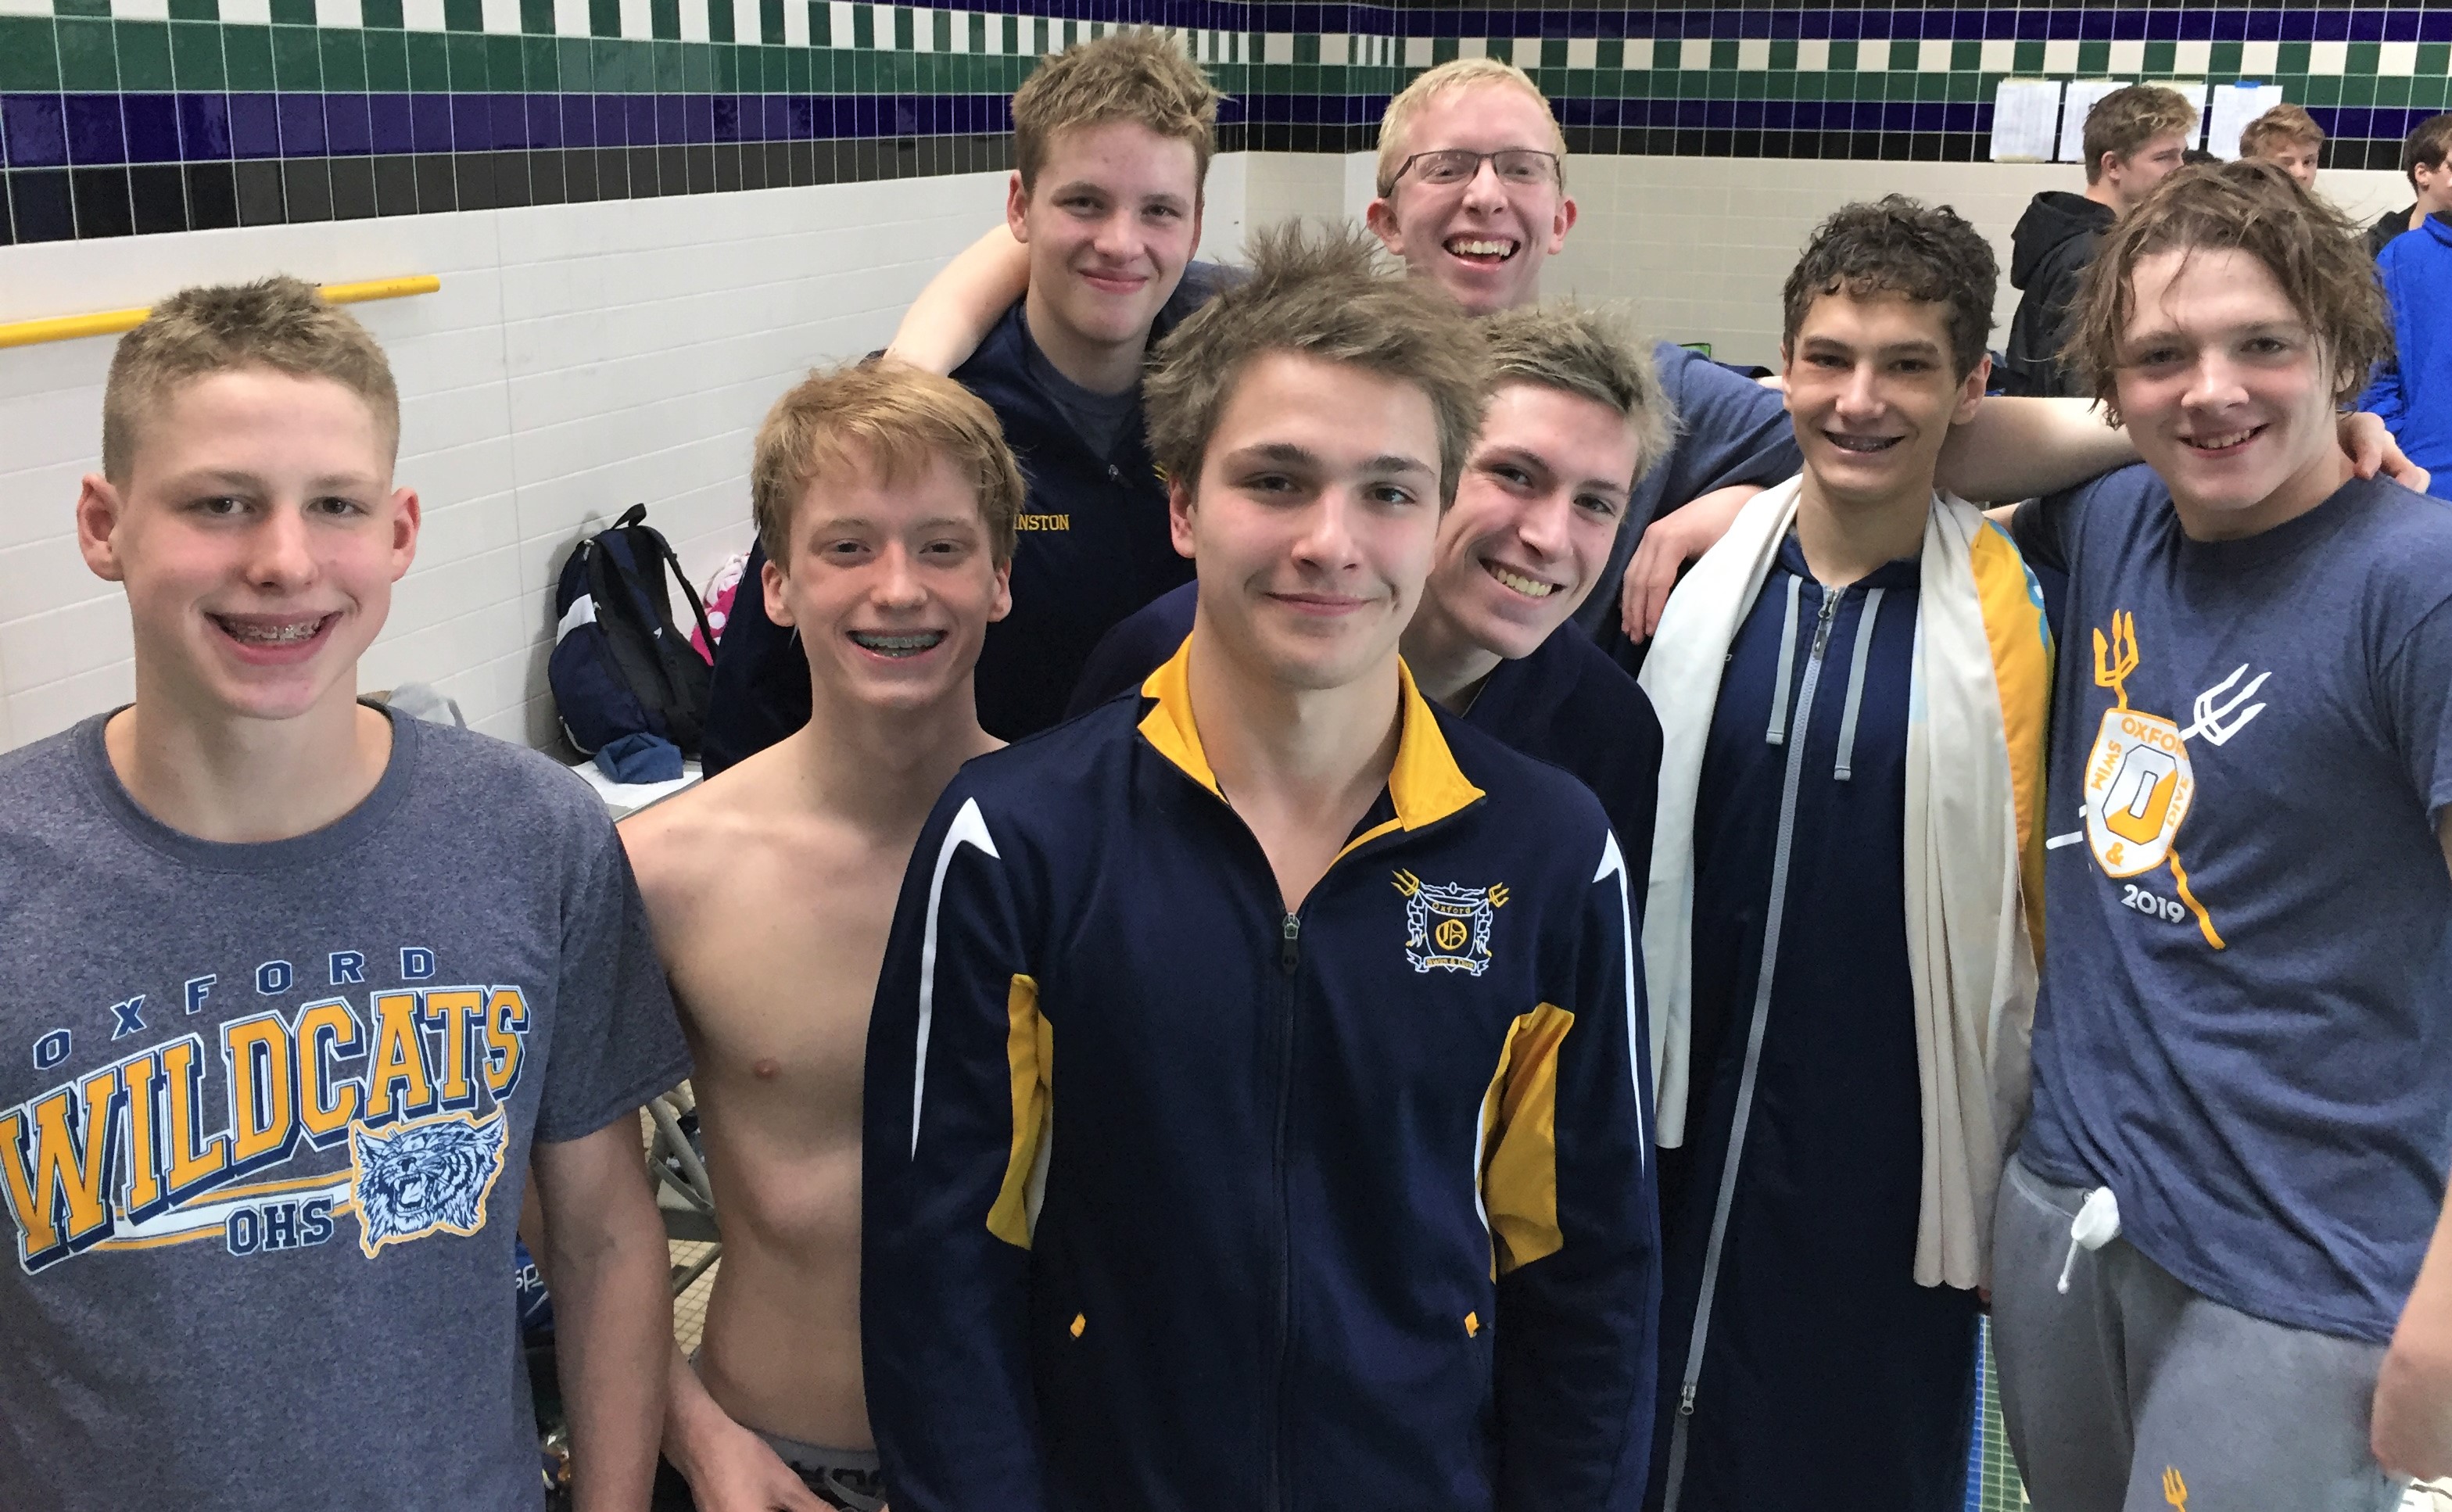 Oxford swimmers pose after their performance at the Oakland County meet. In the back is Nathanial Johnston and Ethan Matteson. In the front, from left, is Carson Wolf, Cole Bukoski, Carter Pollard, Alex Olheiser, Ben Datsko and Zach Beatty. Photo provided. 